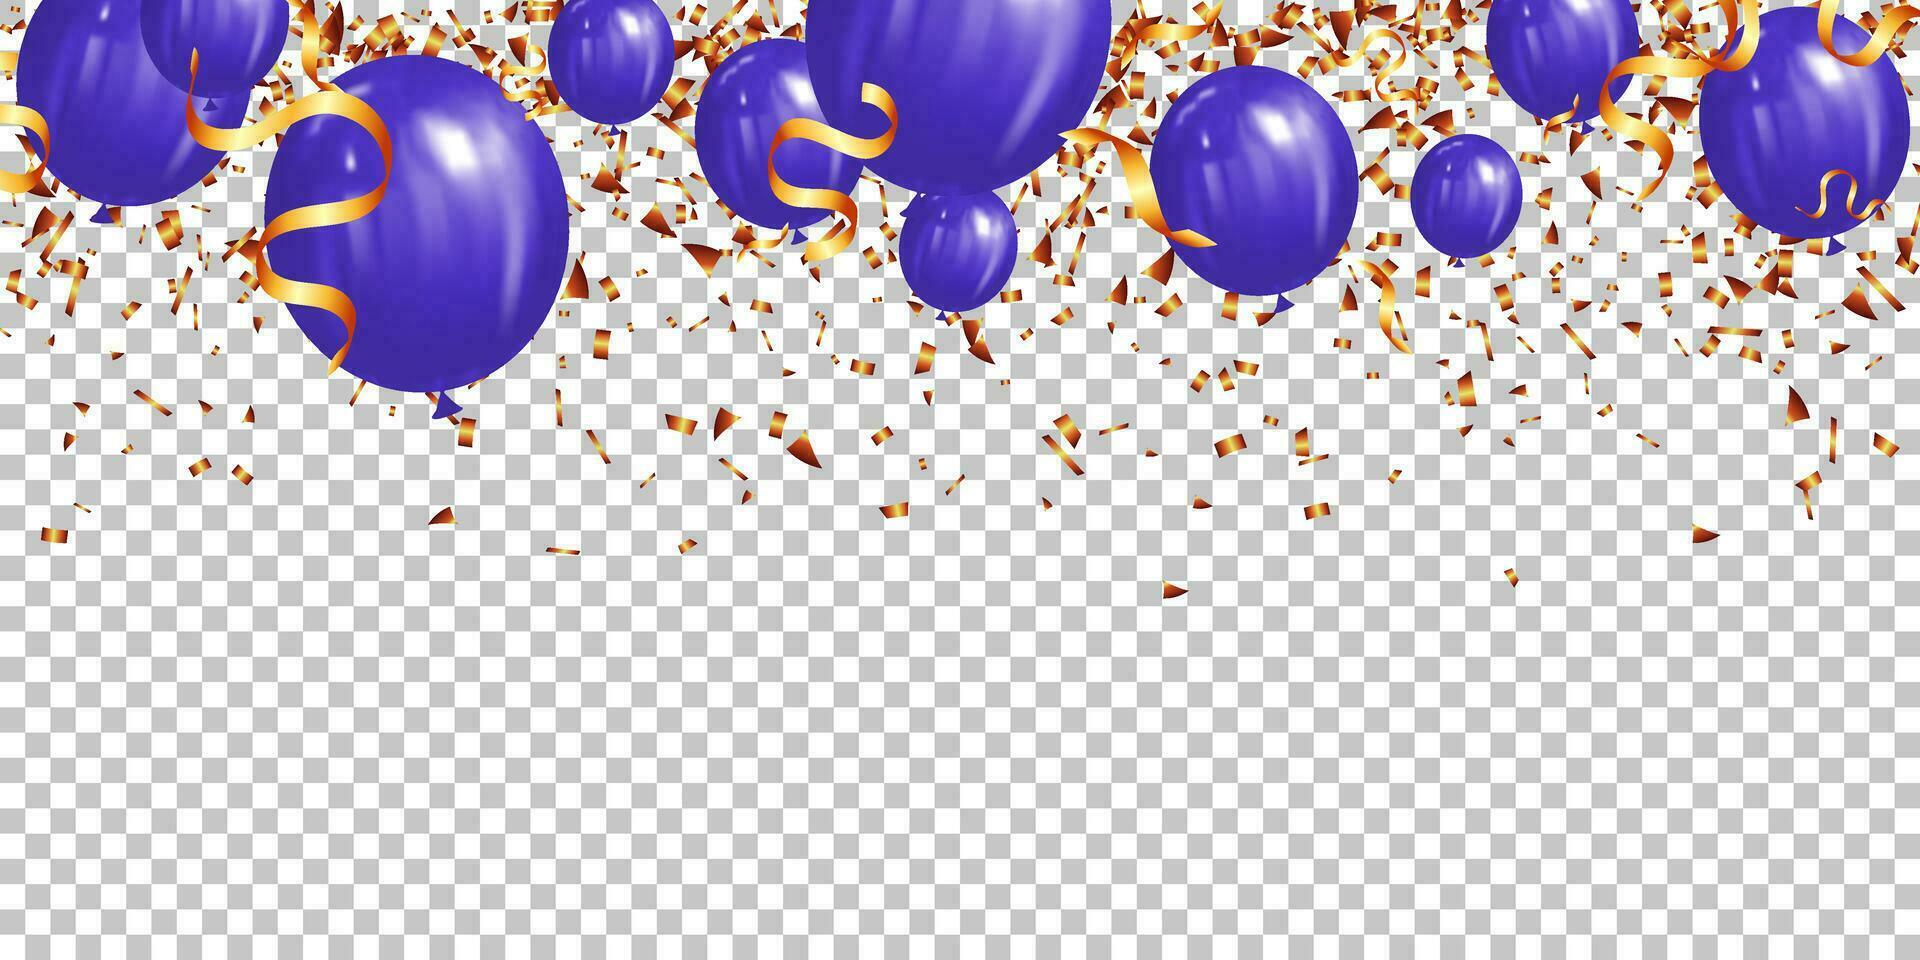 halloween card with purple balloons and gold confetti vector illustration for children's holiday design, decoration, banner